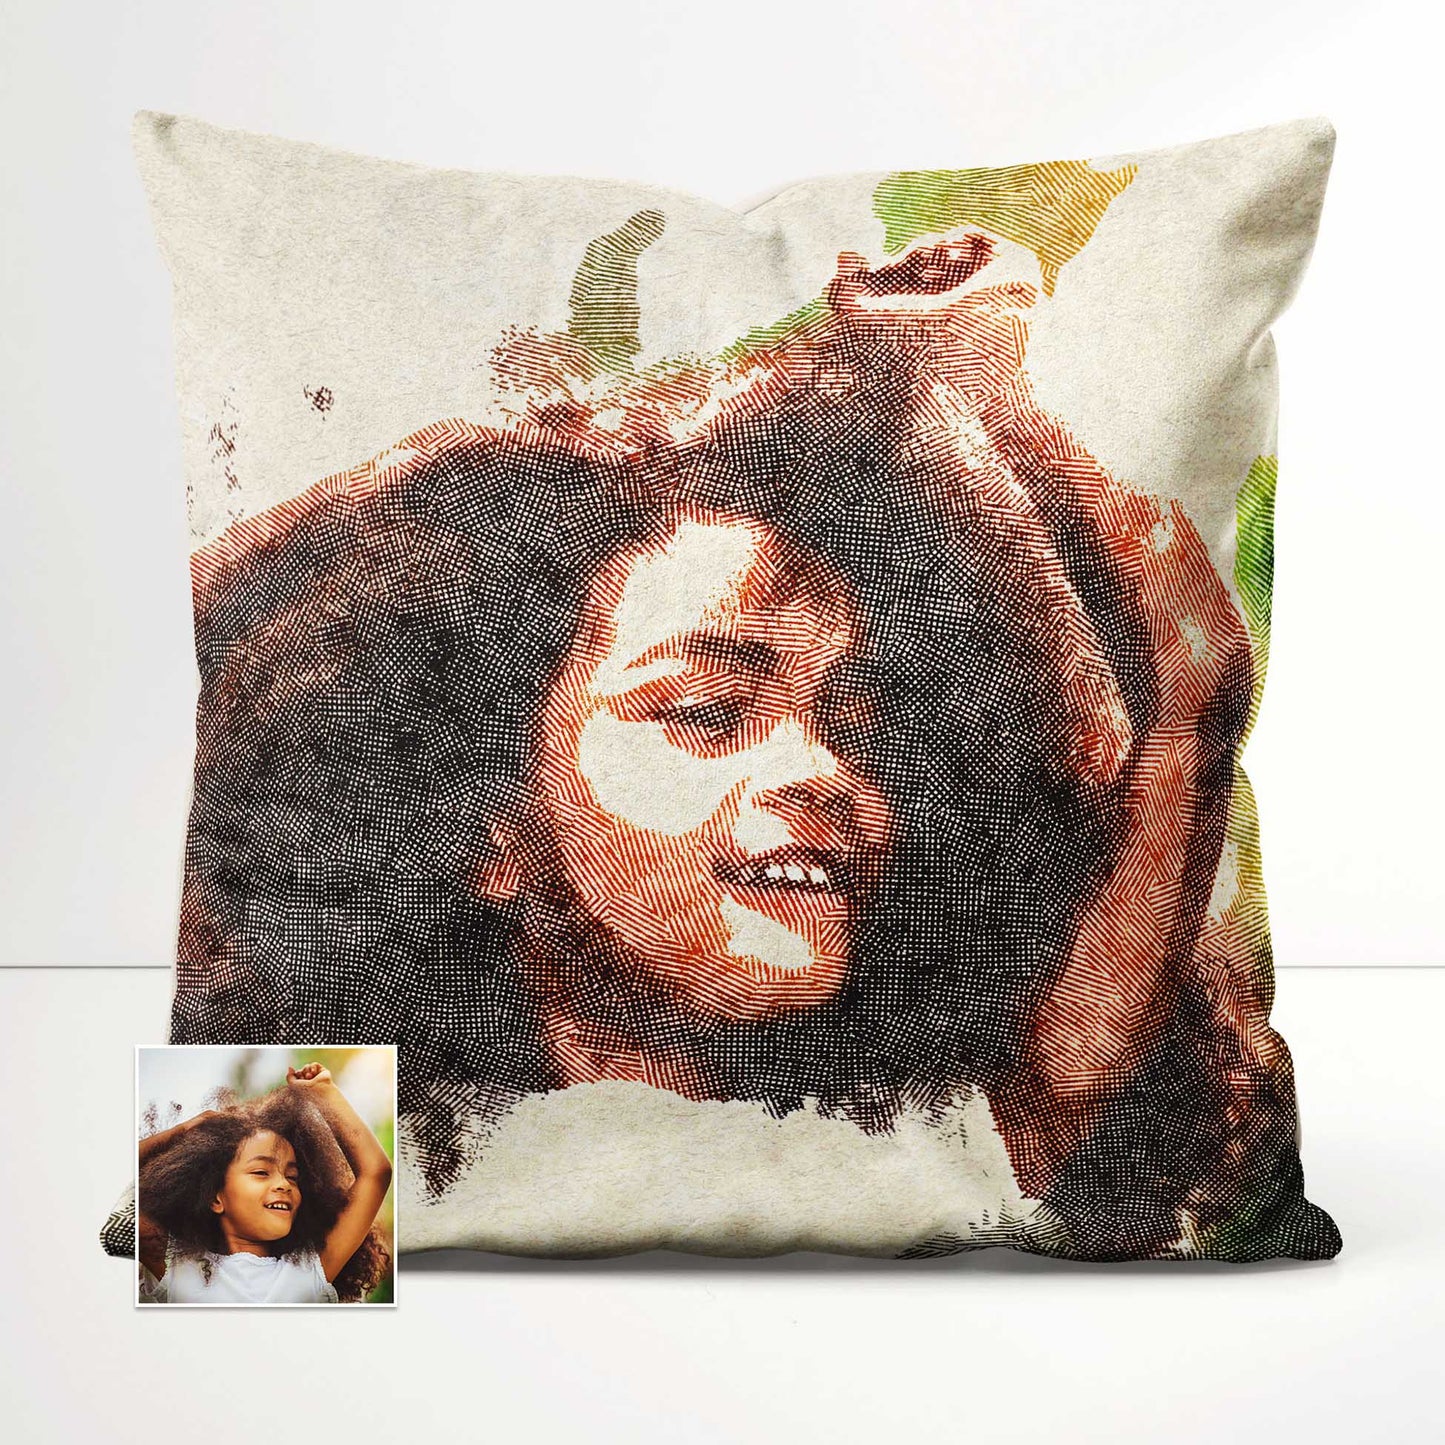 Add a personalized touch to your home with the Personalised Crosshatch Cushion. Created by turning your photo into a stunning painting, it boasts a unique and natural texture that adds depth and character to any space